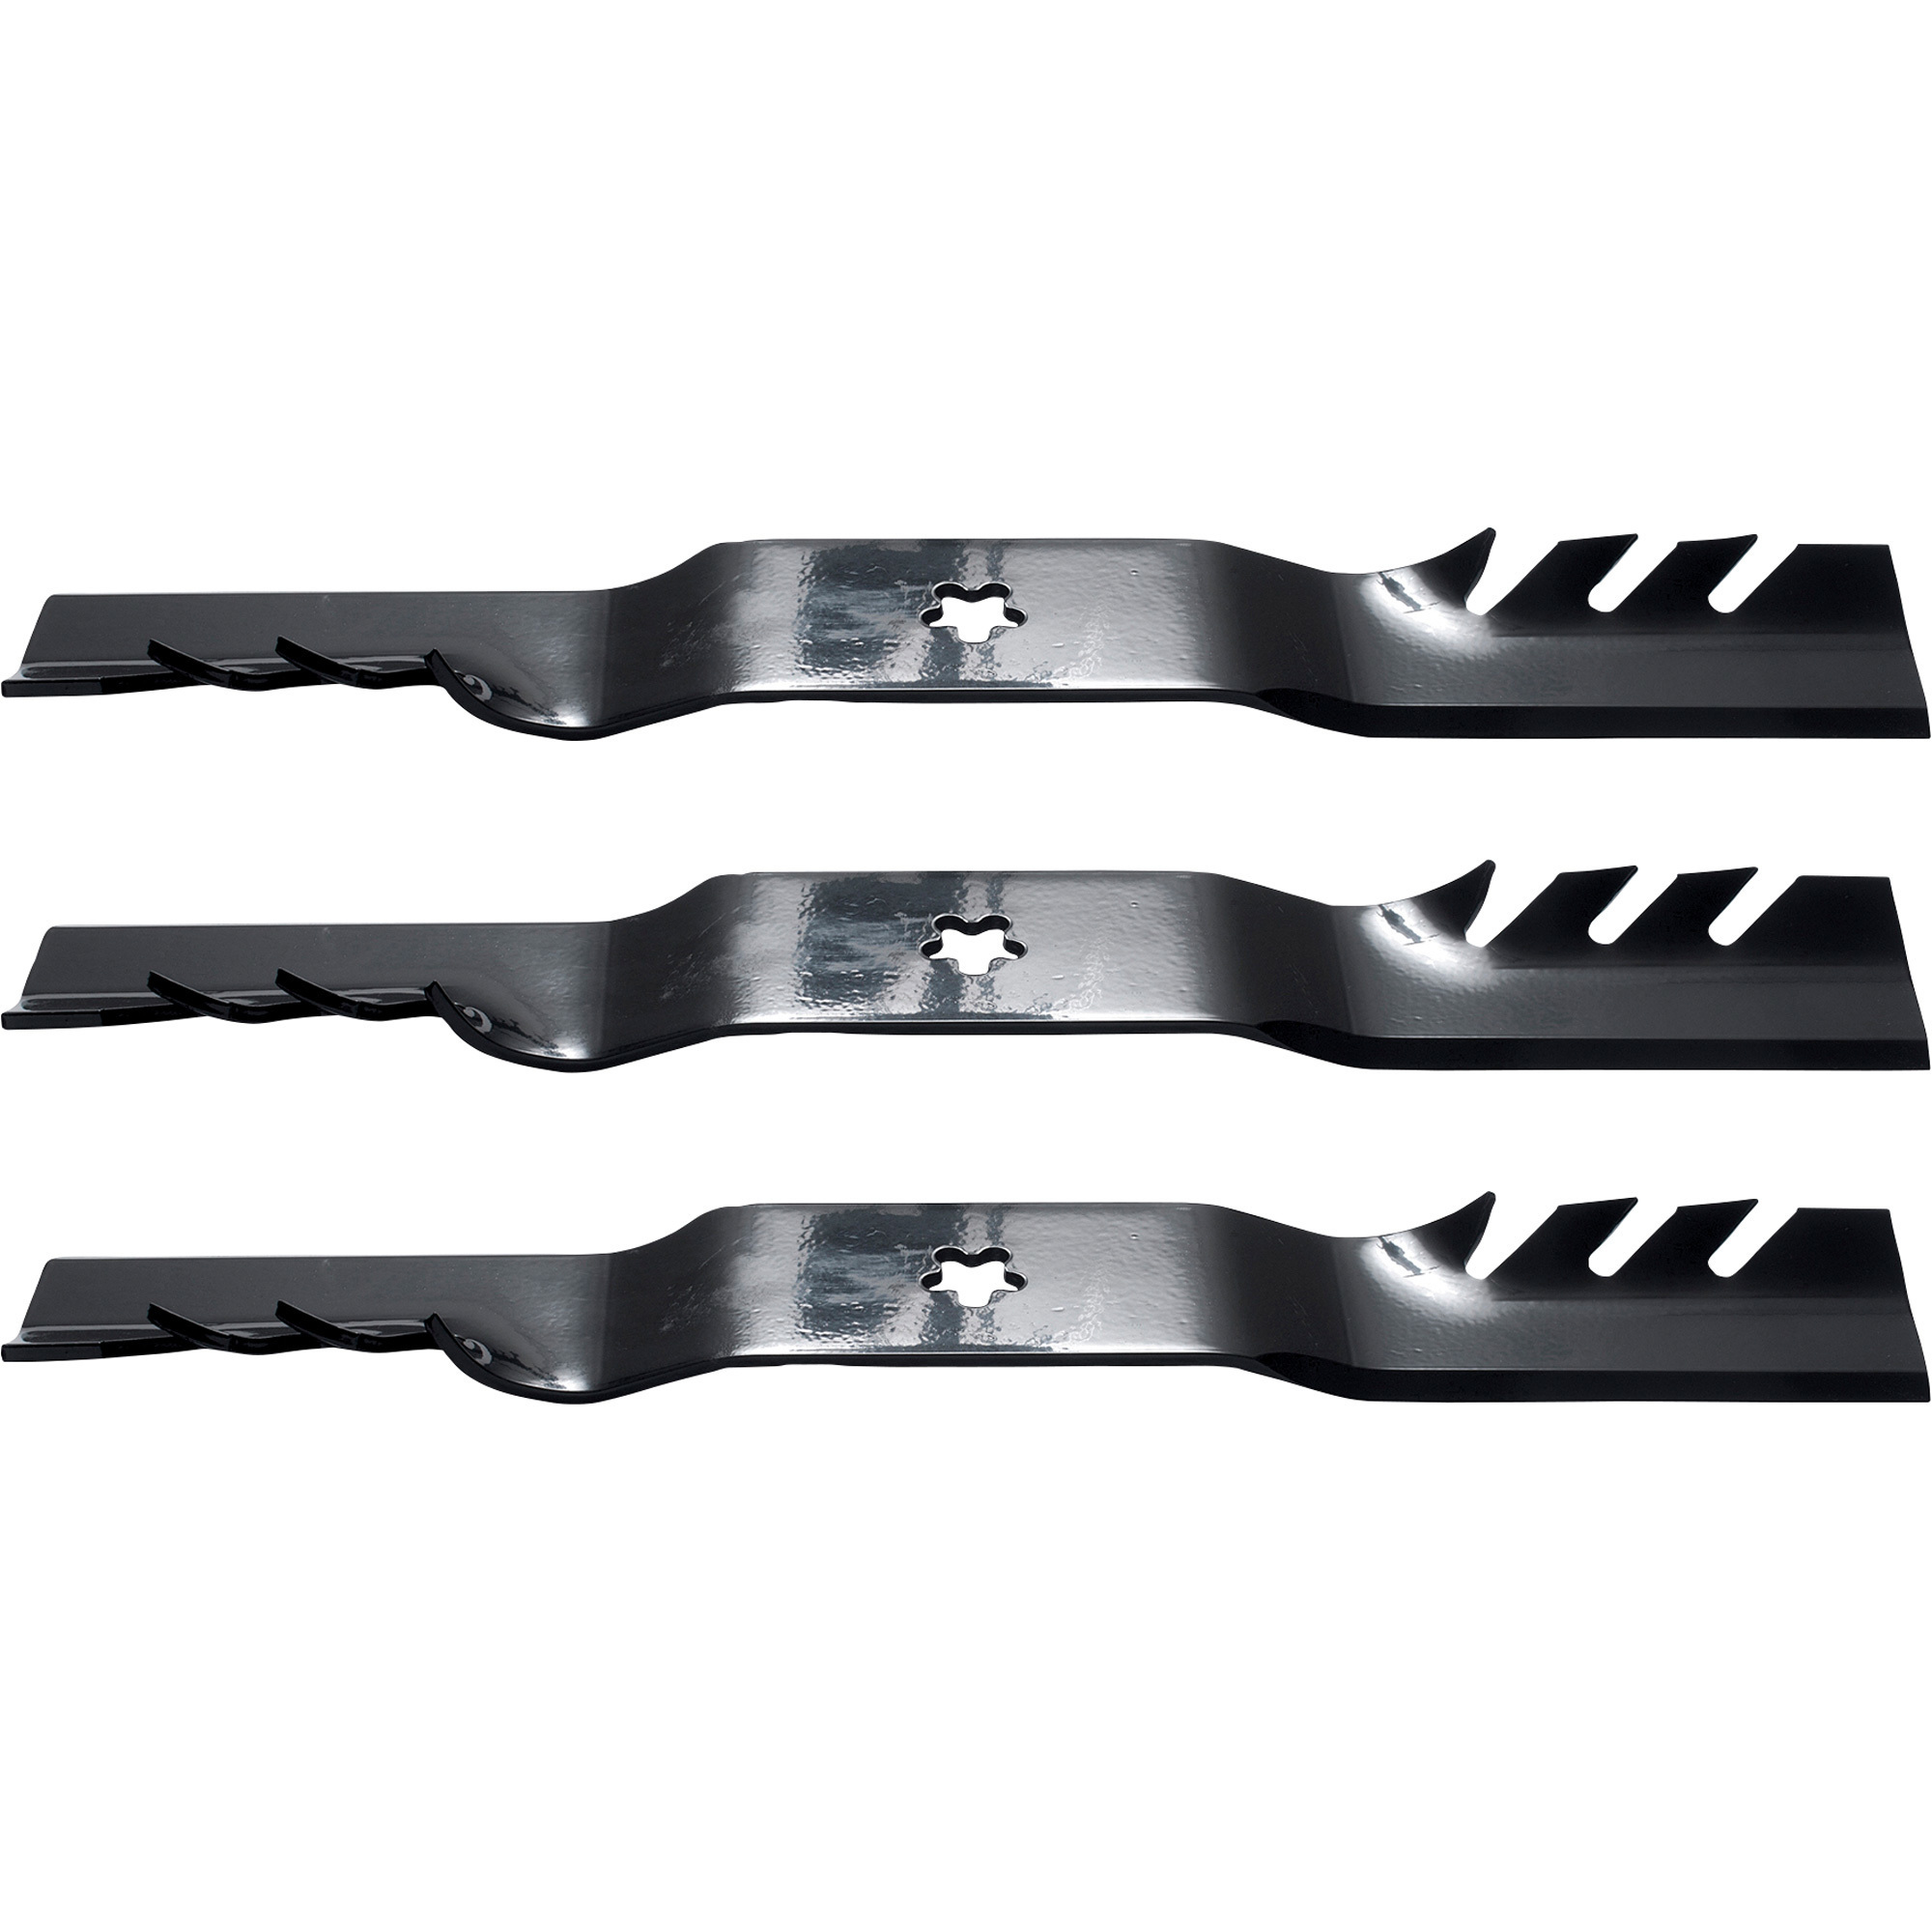 Oregon Gator G3 Replacement Lawn Mower Blades, 3-Piece Set, Fits 54Inch Mowers, Model 528970